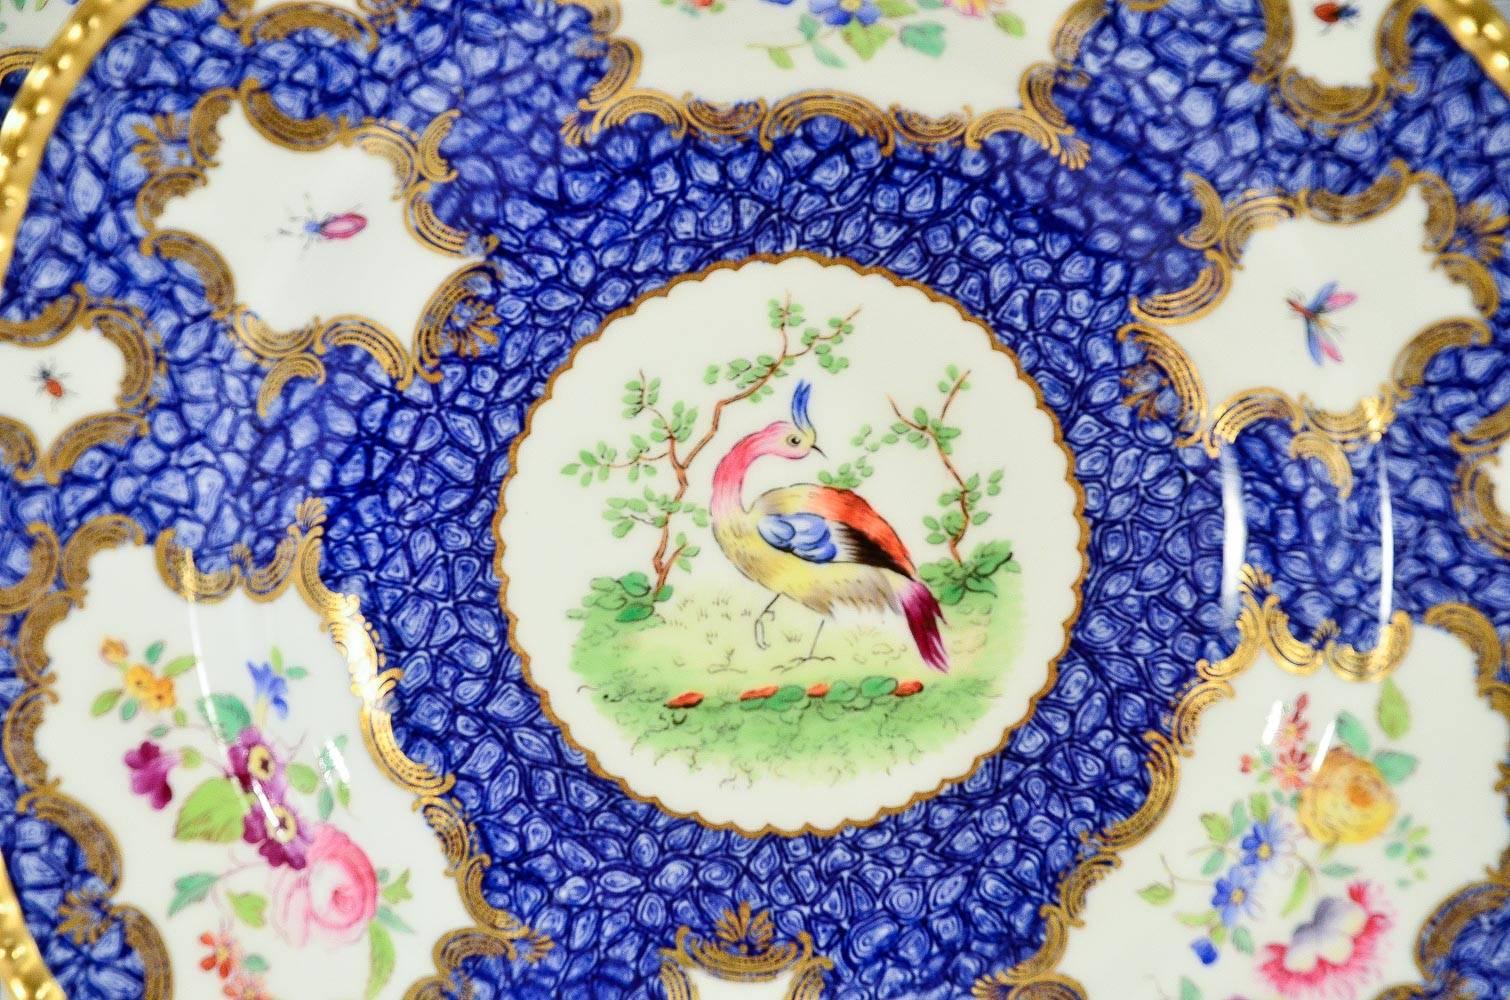 Set of 12 Coalport Hand Painted Exotic Bird Lapis Blue & Gilt Soup Bowls Plates In Excellent Condition For Sale In Great Barrington, MA